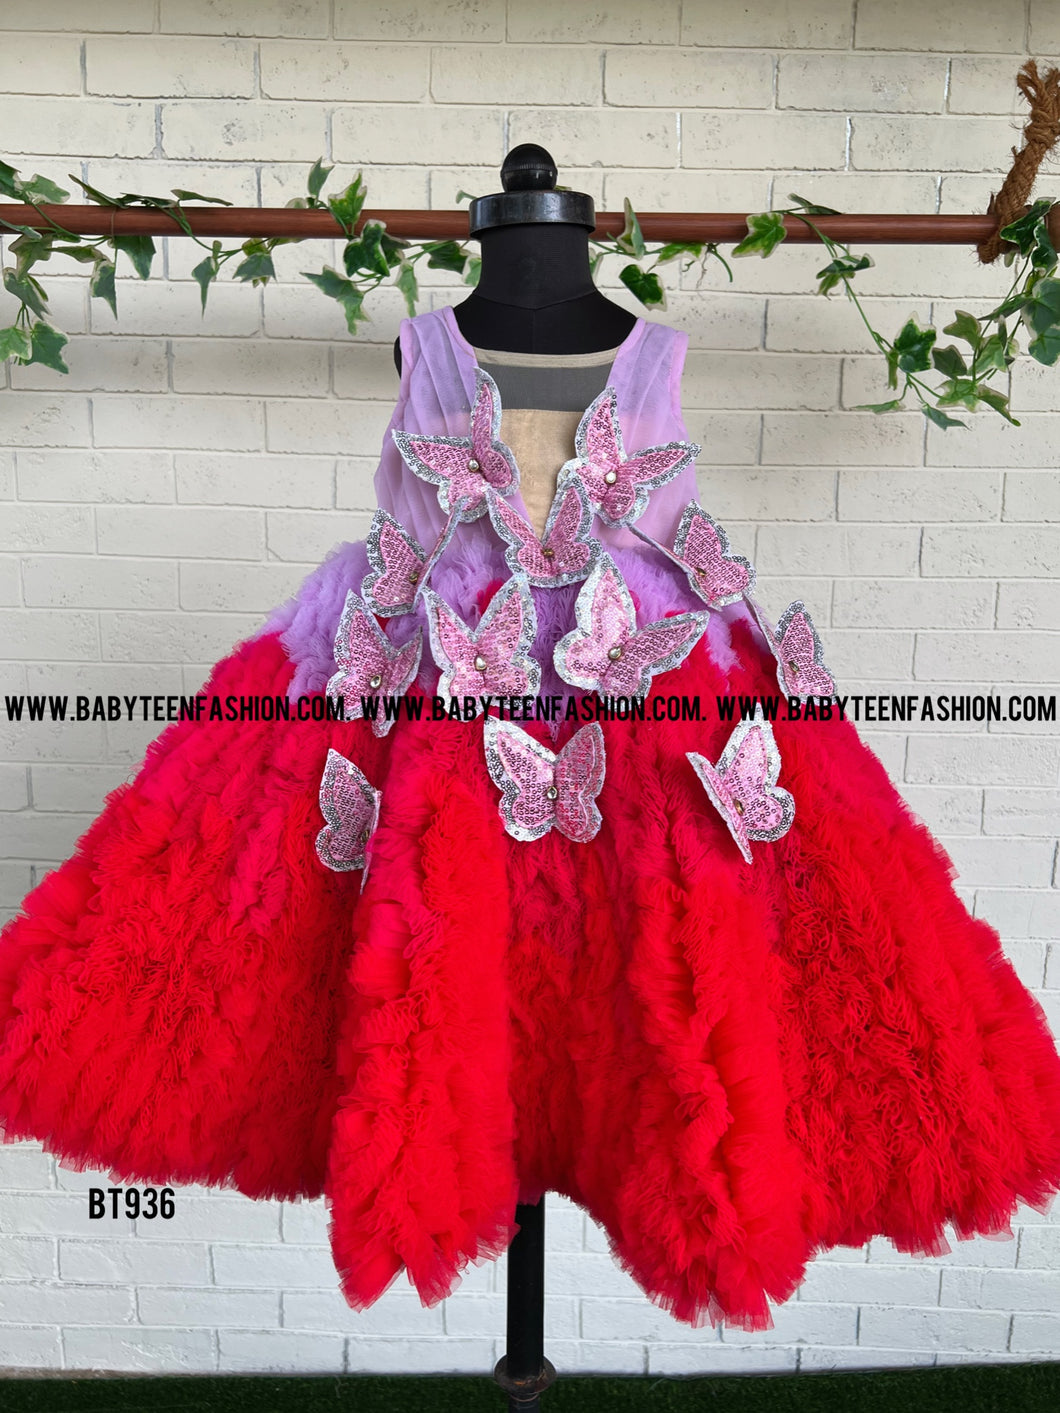 BT936 Enchanted Butterfly Party Dress– A Fairytale Match